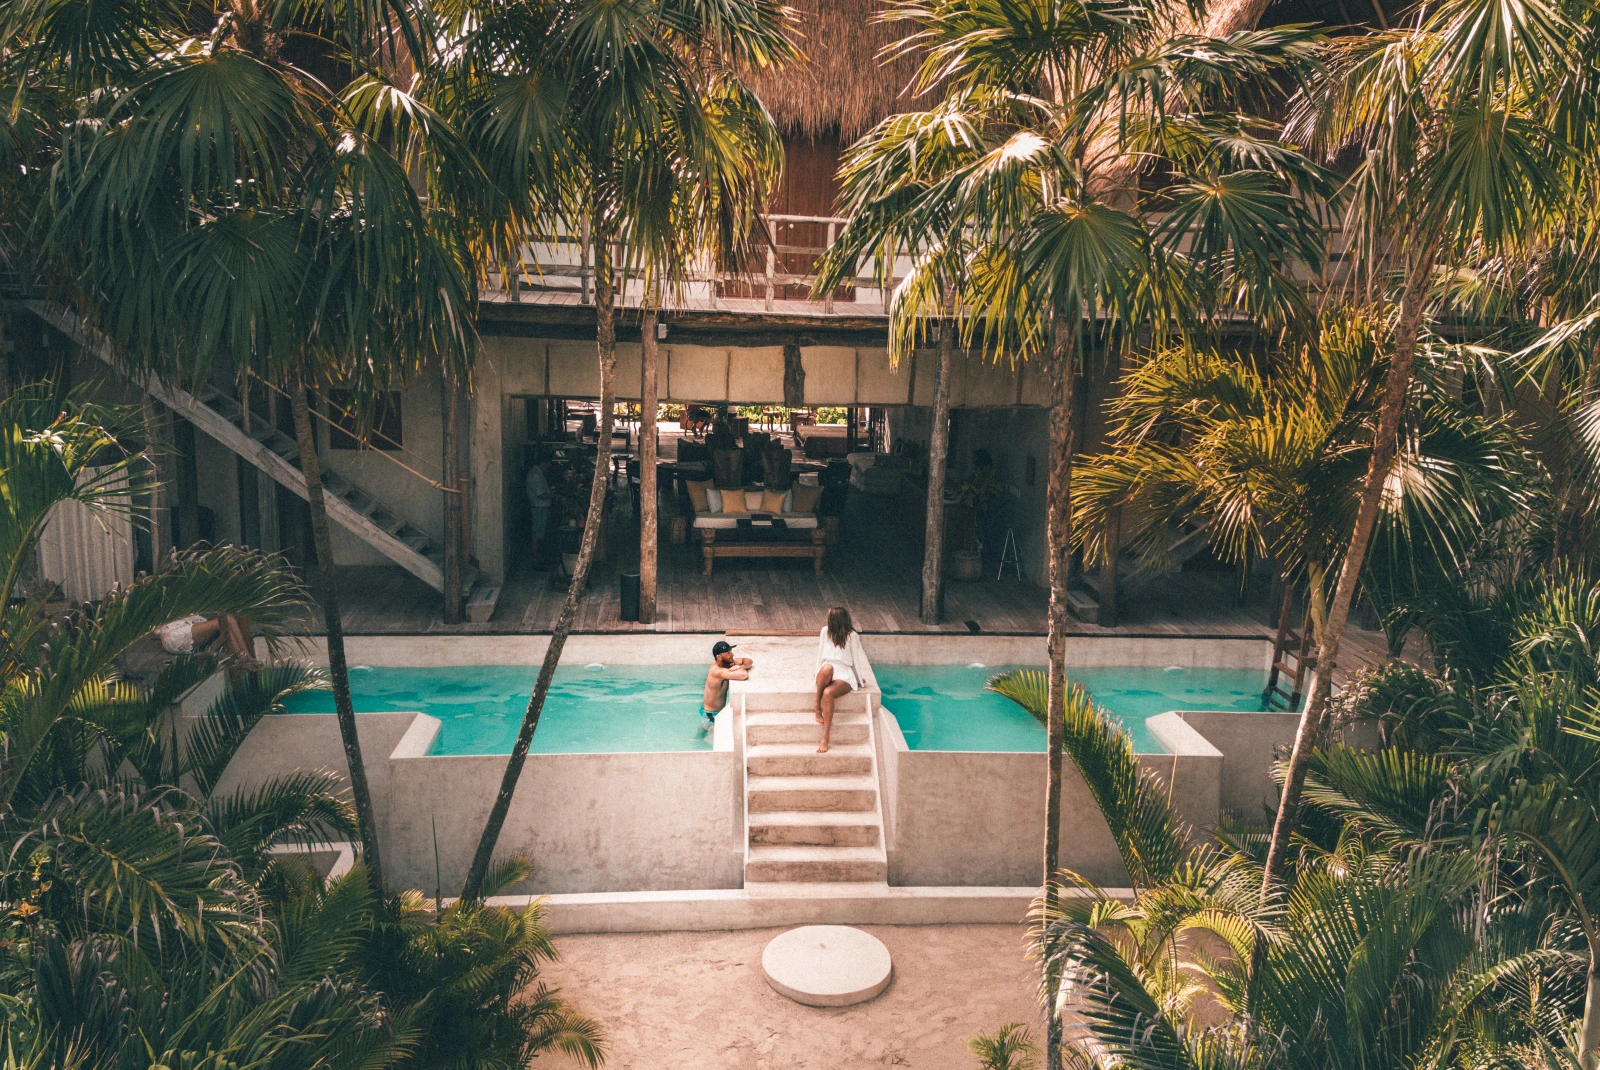 Hotel pool in Tulum, Mexico surrounded by palm trees